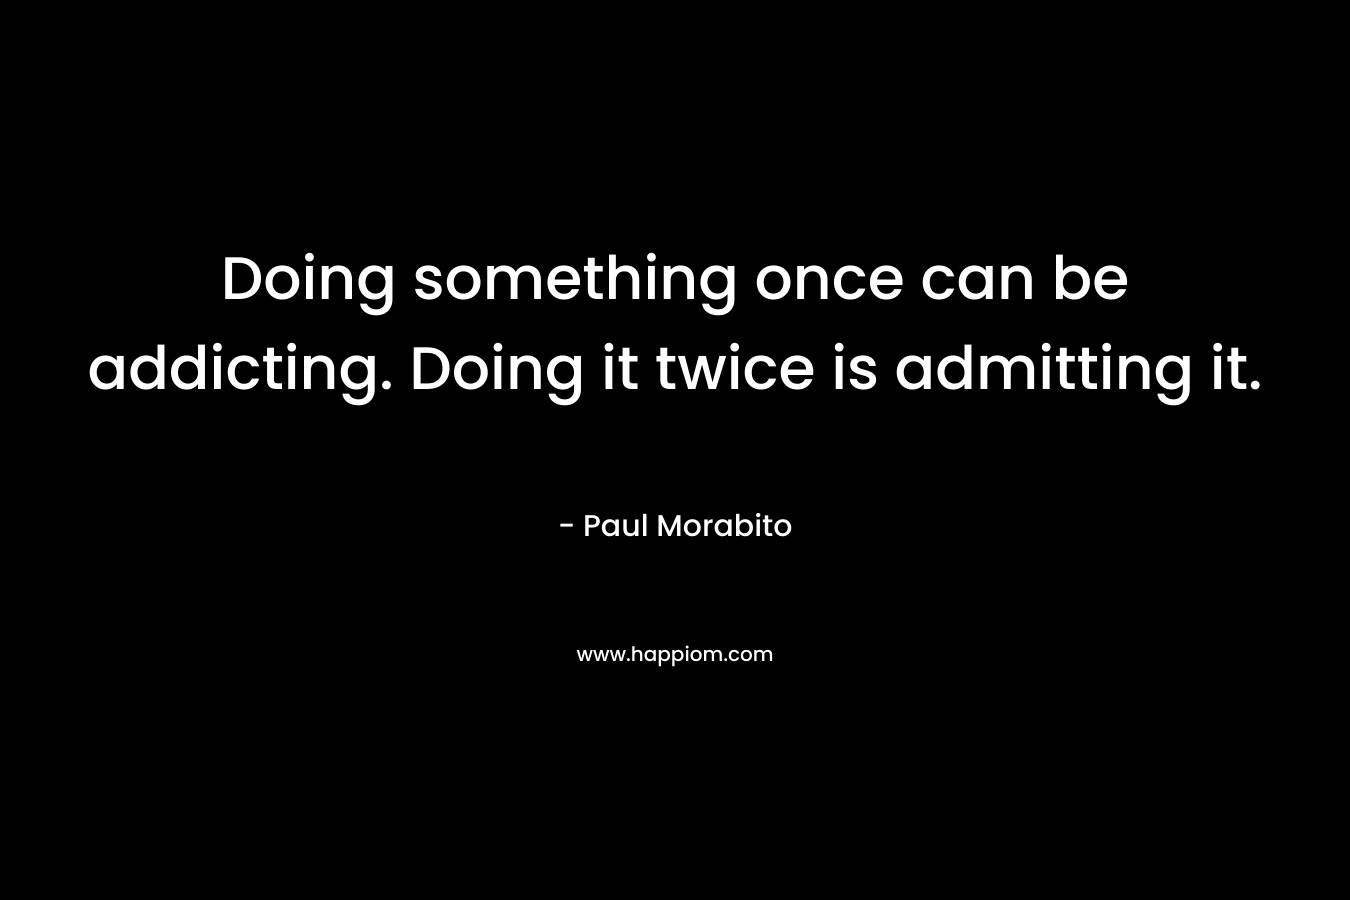 Doing something once can be addicting. Doing it twice is admitting it.